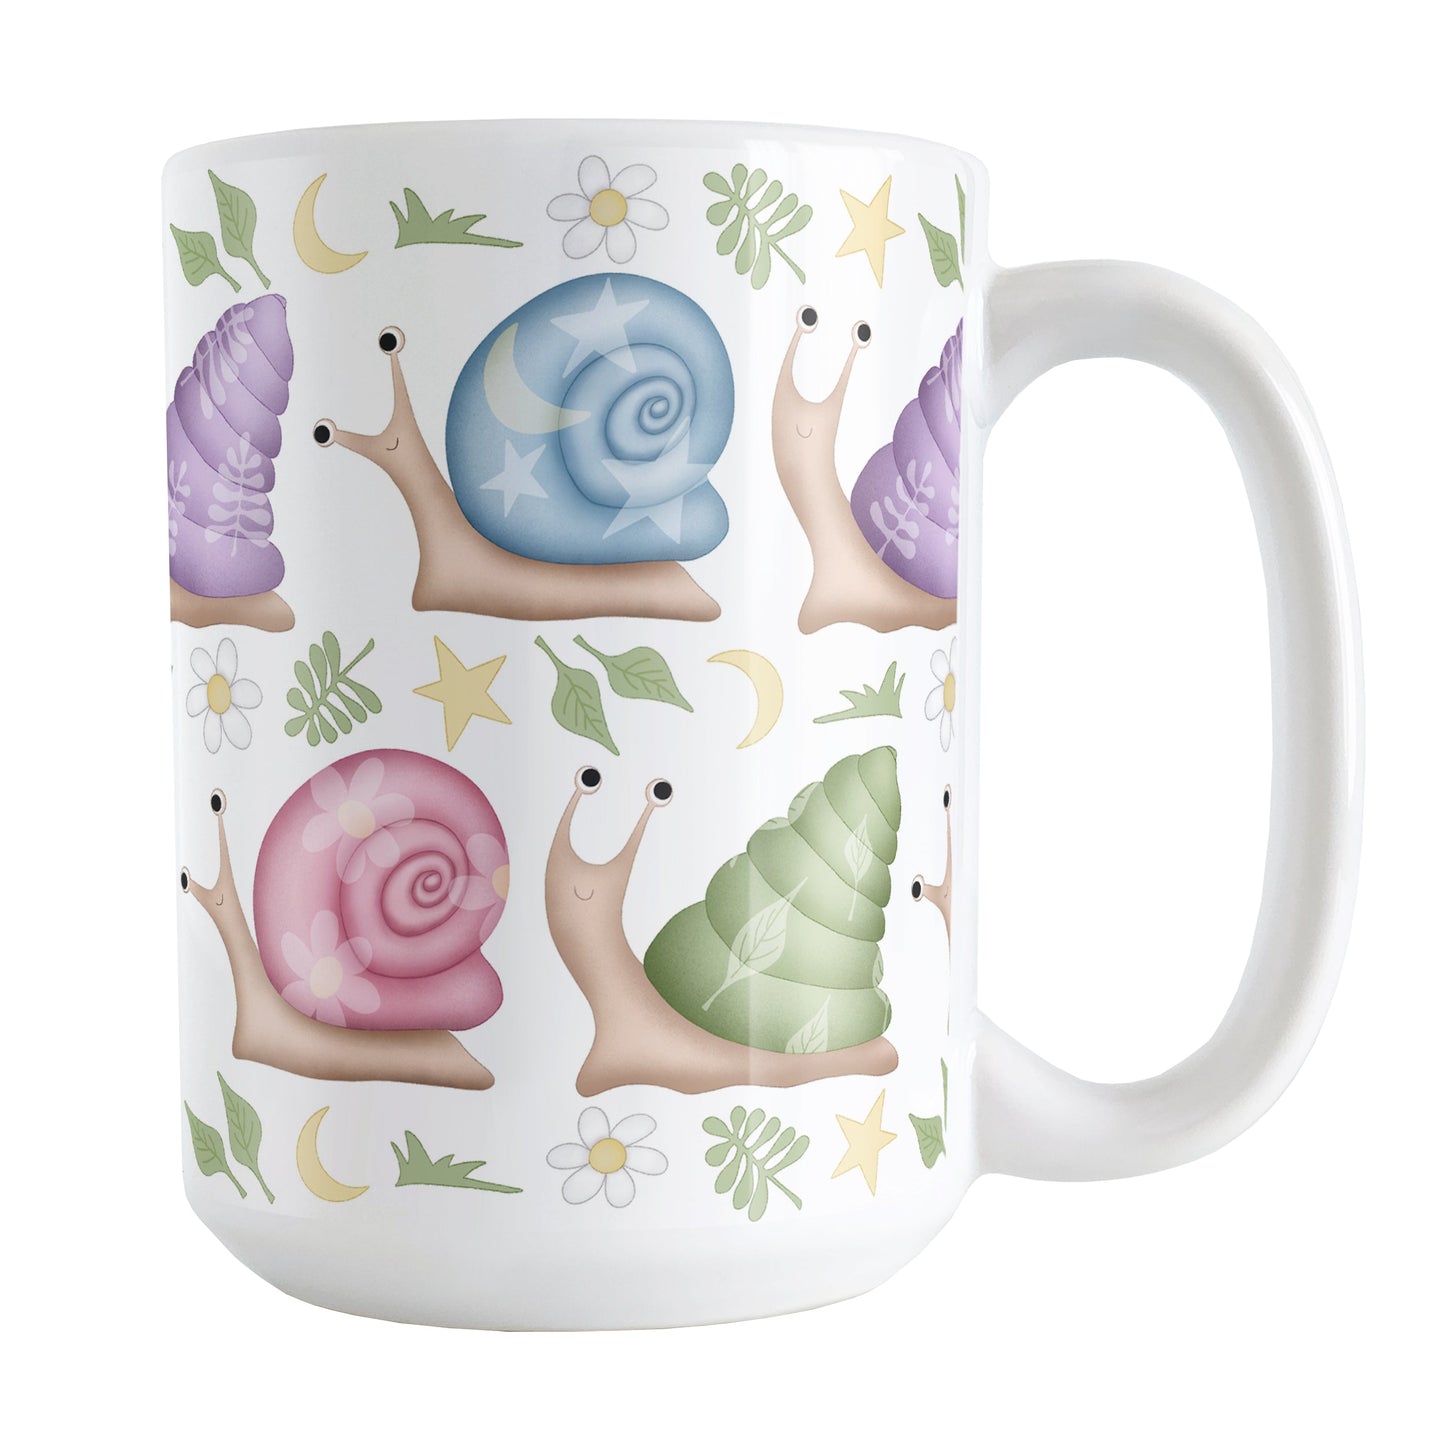 Cute Spring Summer Snails Pattern Mug (15oz) at Amy's Coffee Mugs. A cute snail mug with a whimsical pattern of snails with happy faces in two rows around the mug with pink, purple, blue, and green shells floral and stars watermarks, with foliage, moons, and stars between the rows.